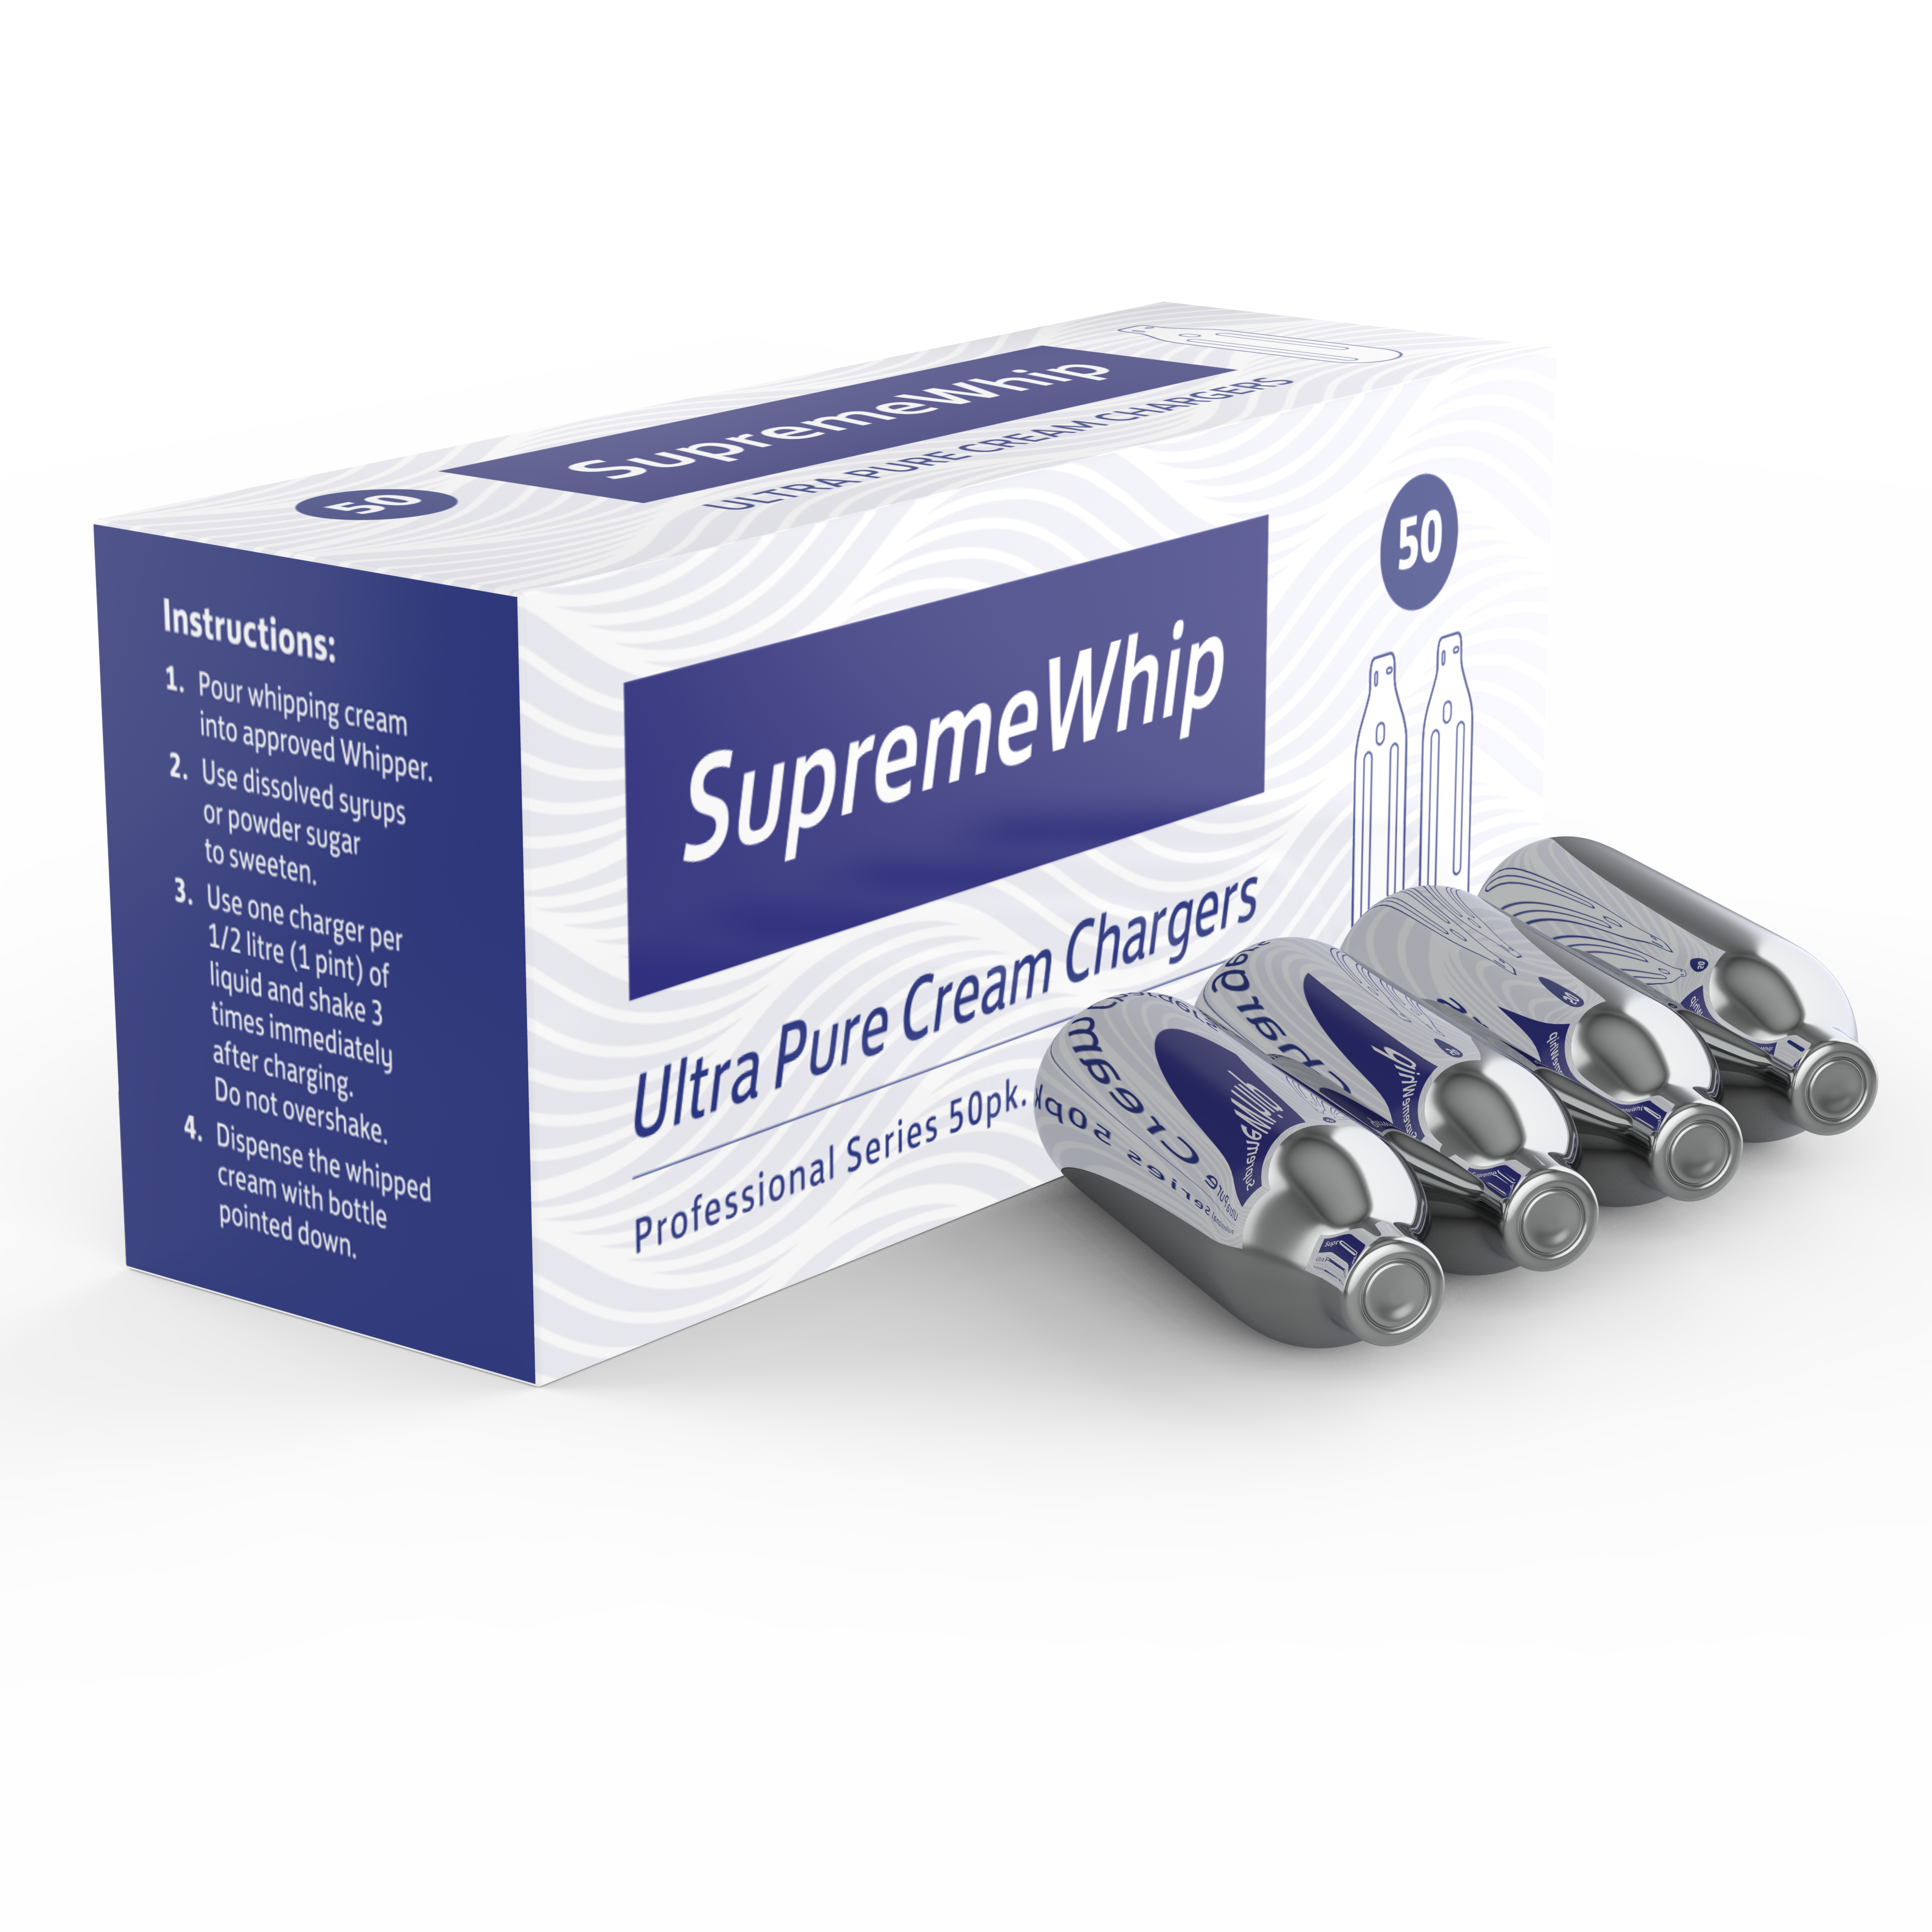 SupremeWhip Cream Chargers 8.2g in 50Pks